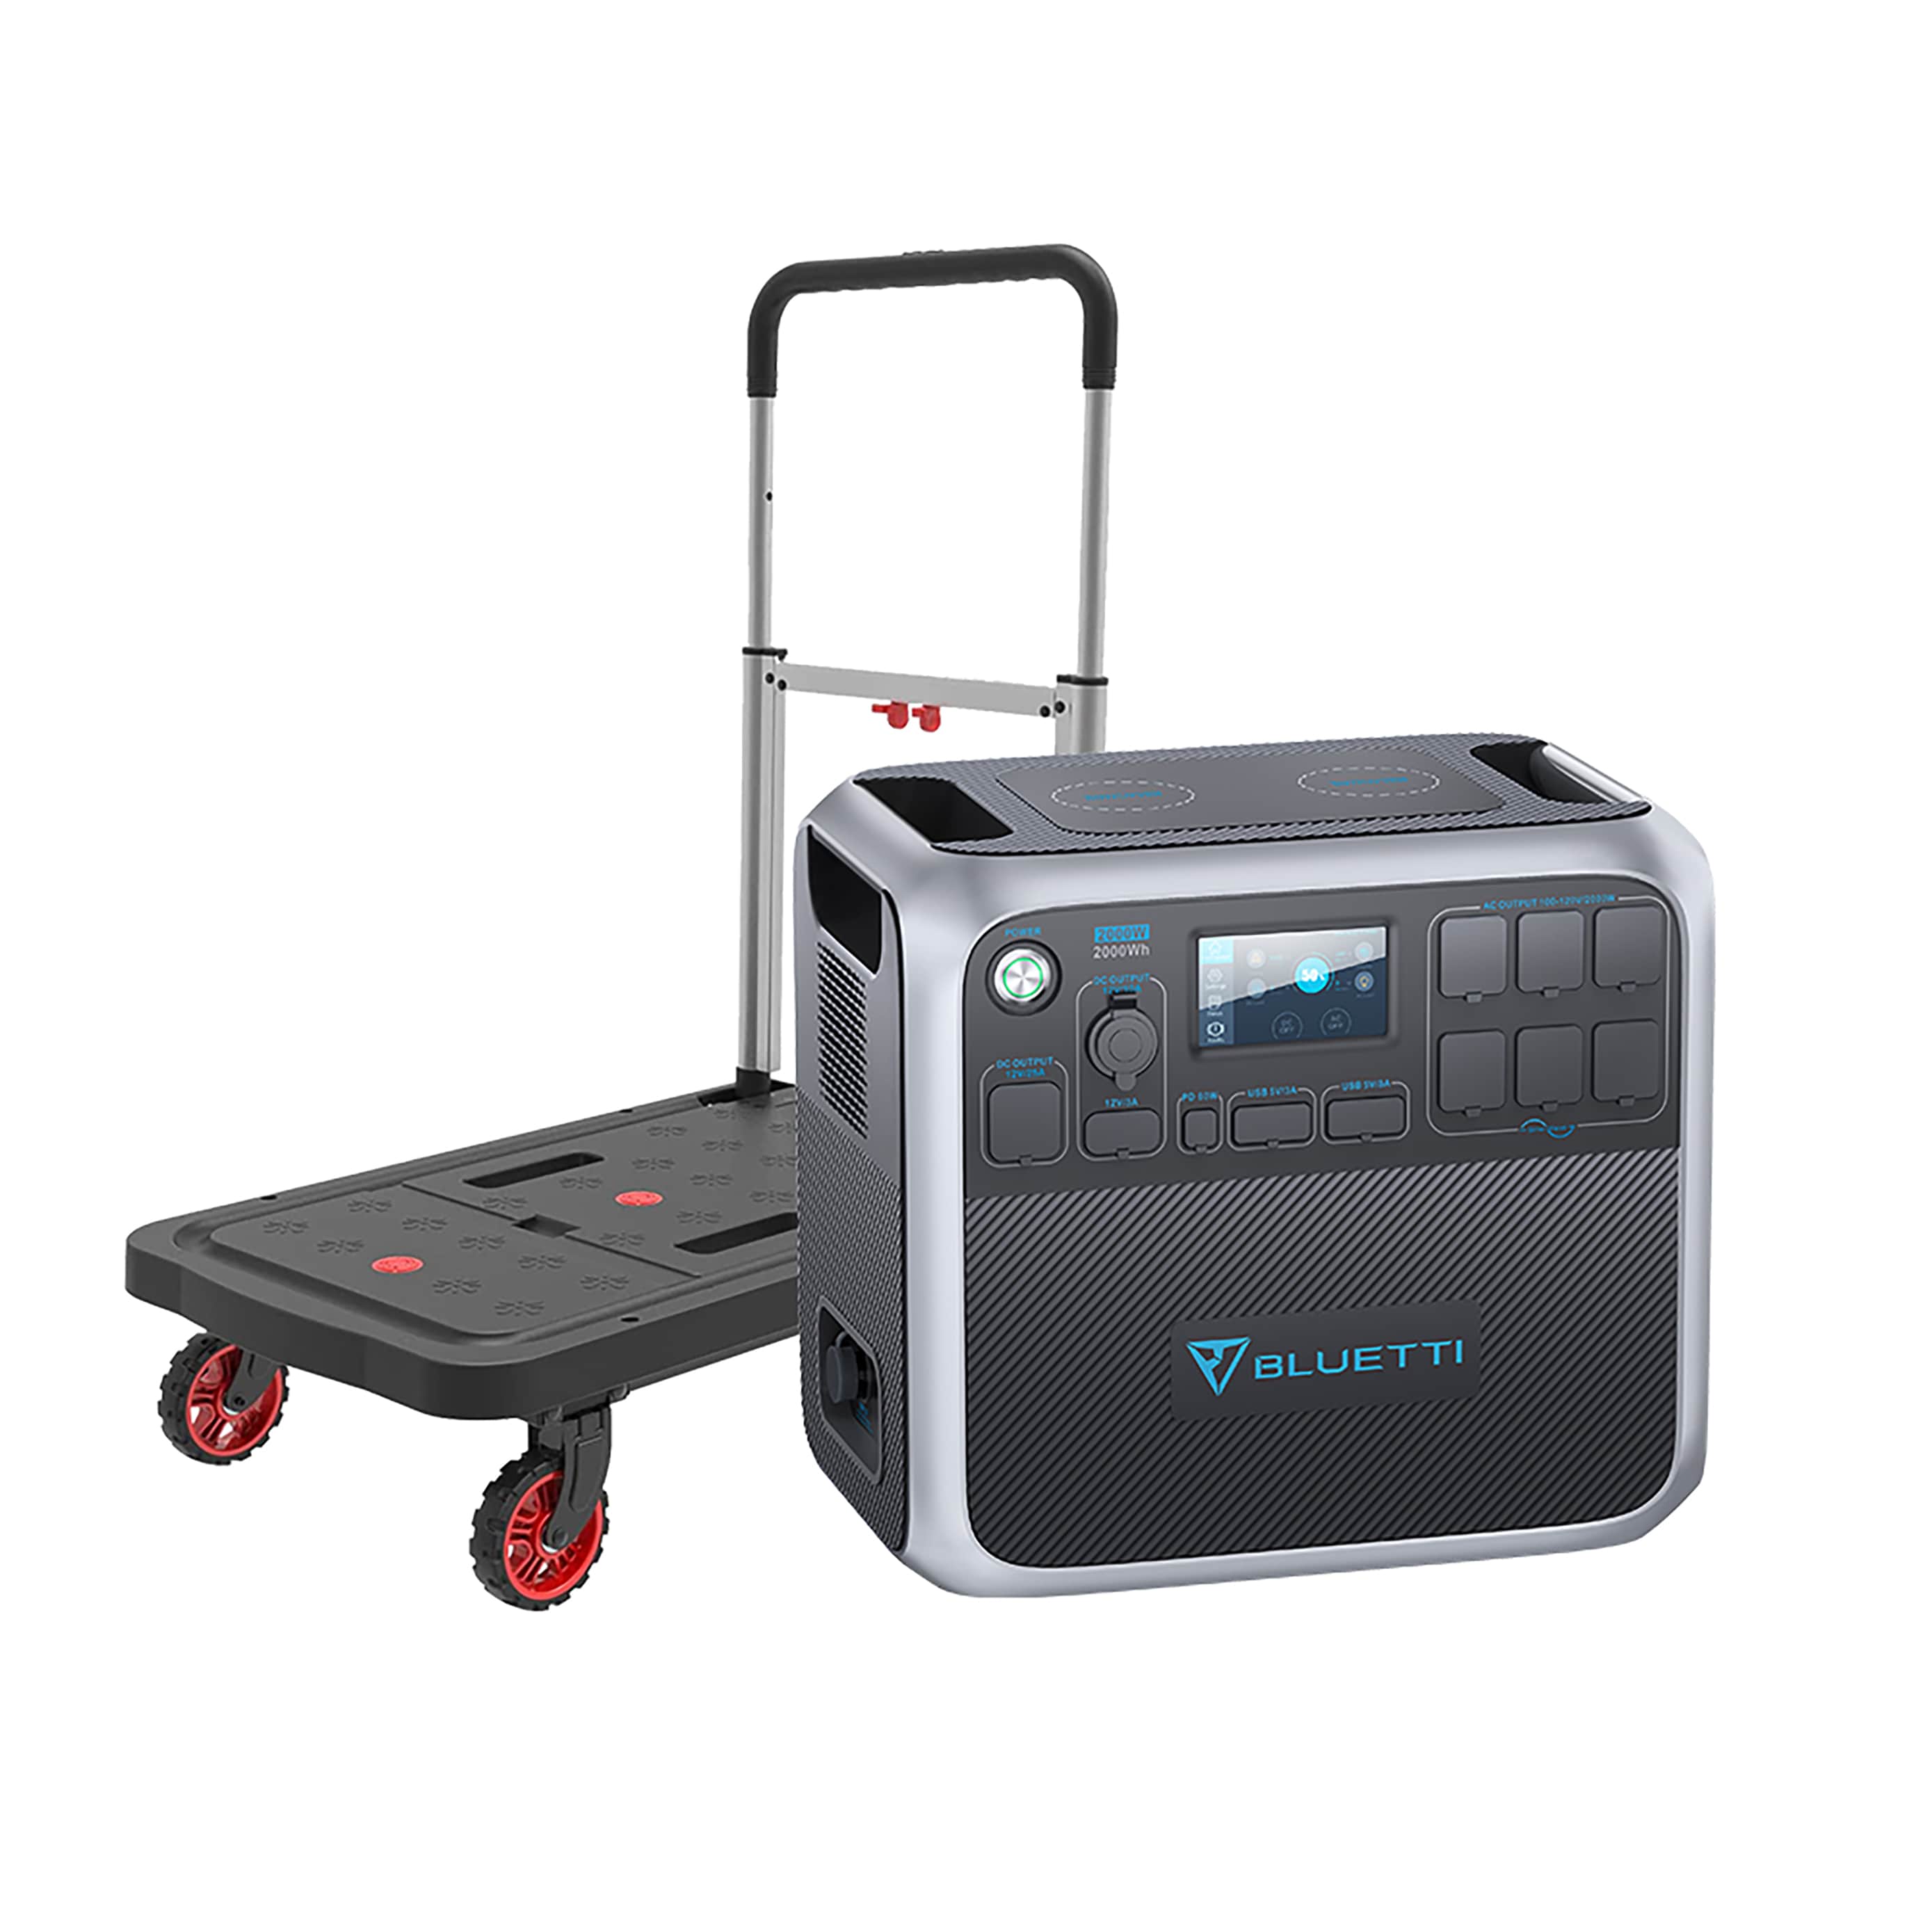 Jackery Explorer 1000 Plus (Expand to 2520Wh) 2000-Watt Portable Power  Station (2 Solar Panels Included) in the Portable Power Stations department  at